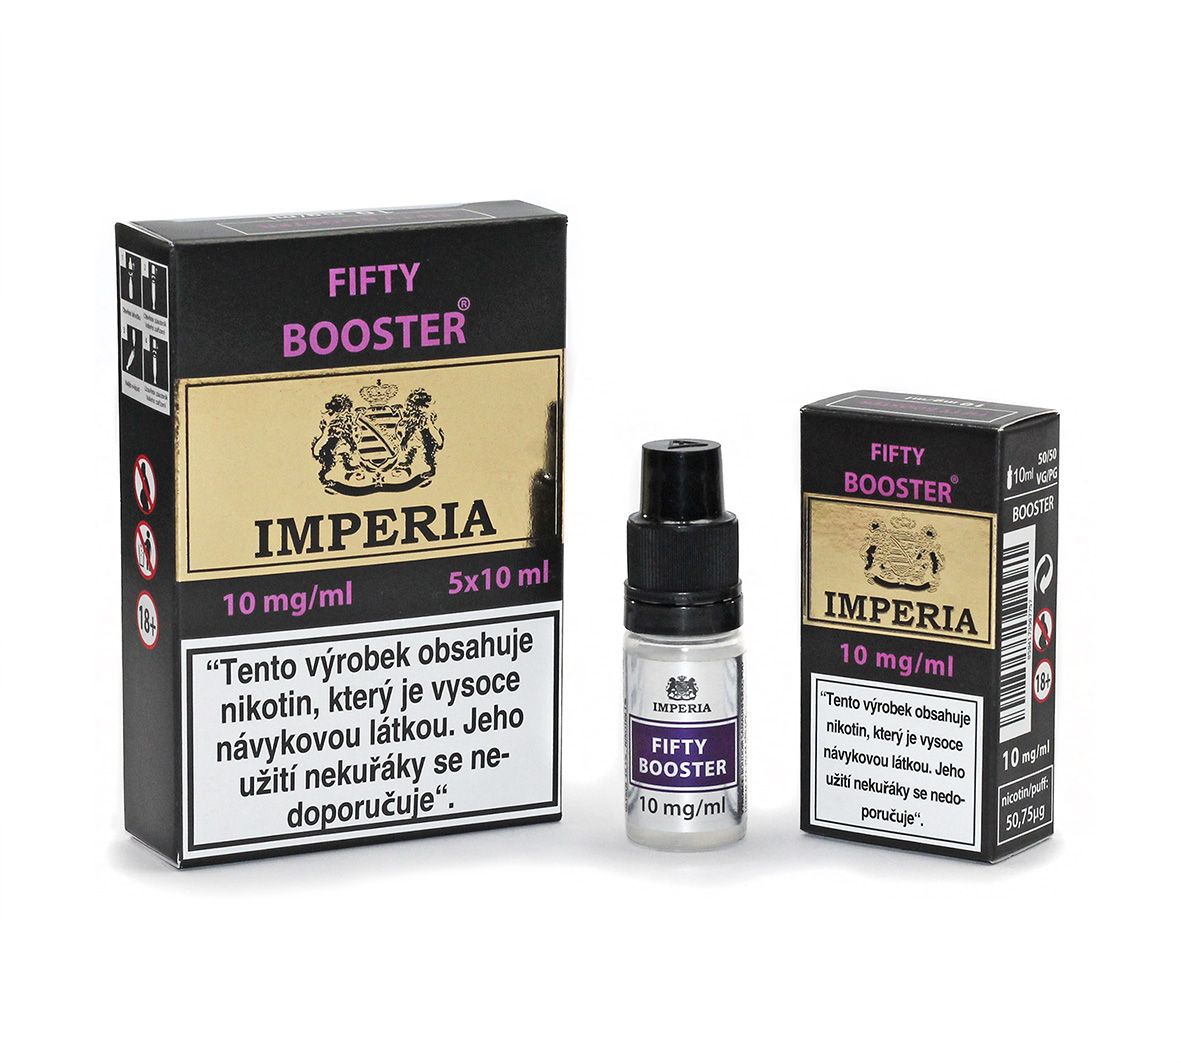 IMPERIA Fifty Booster 10mg - 5x10ml (50PG/50VG)